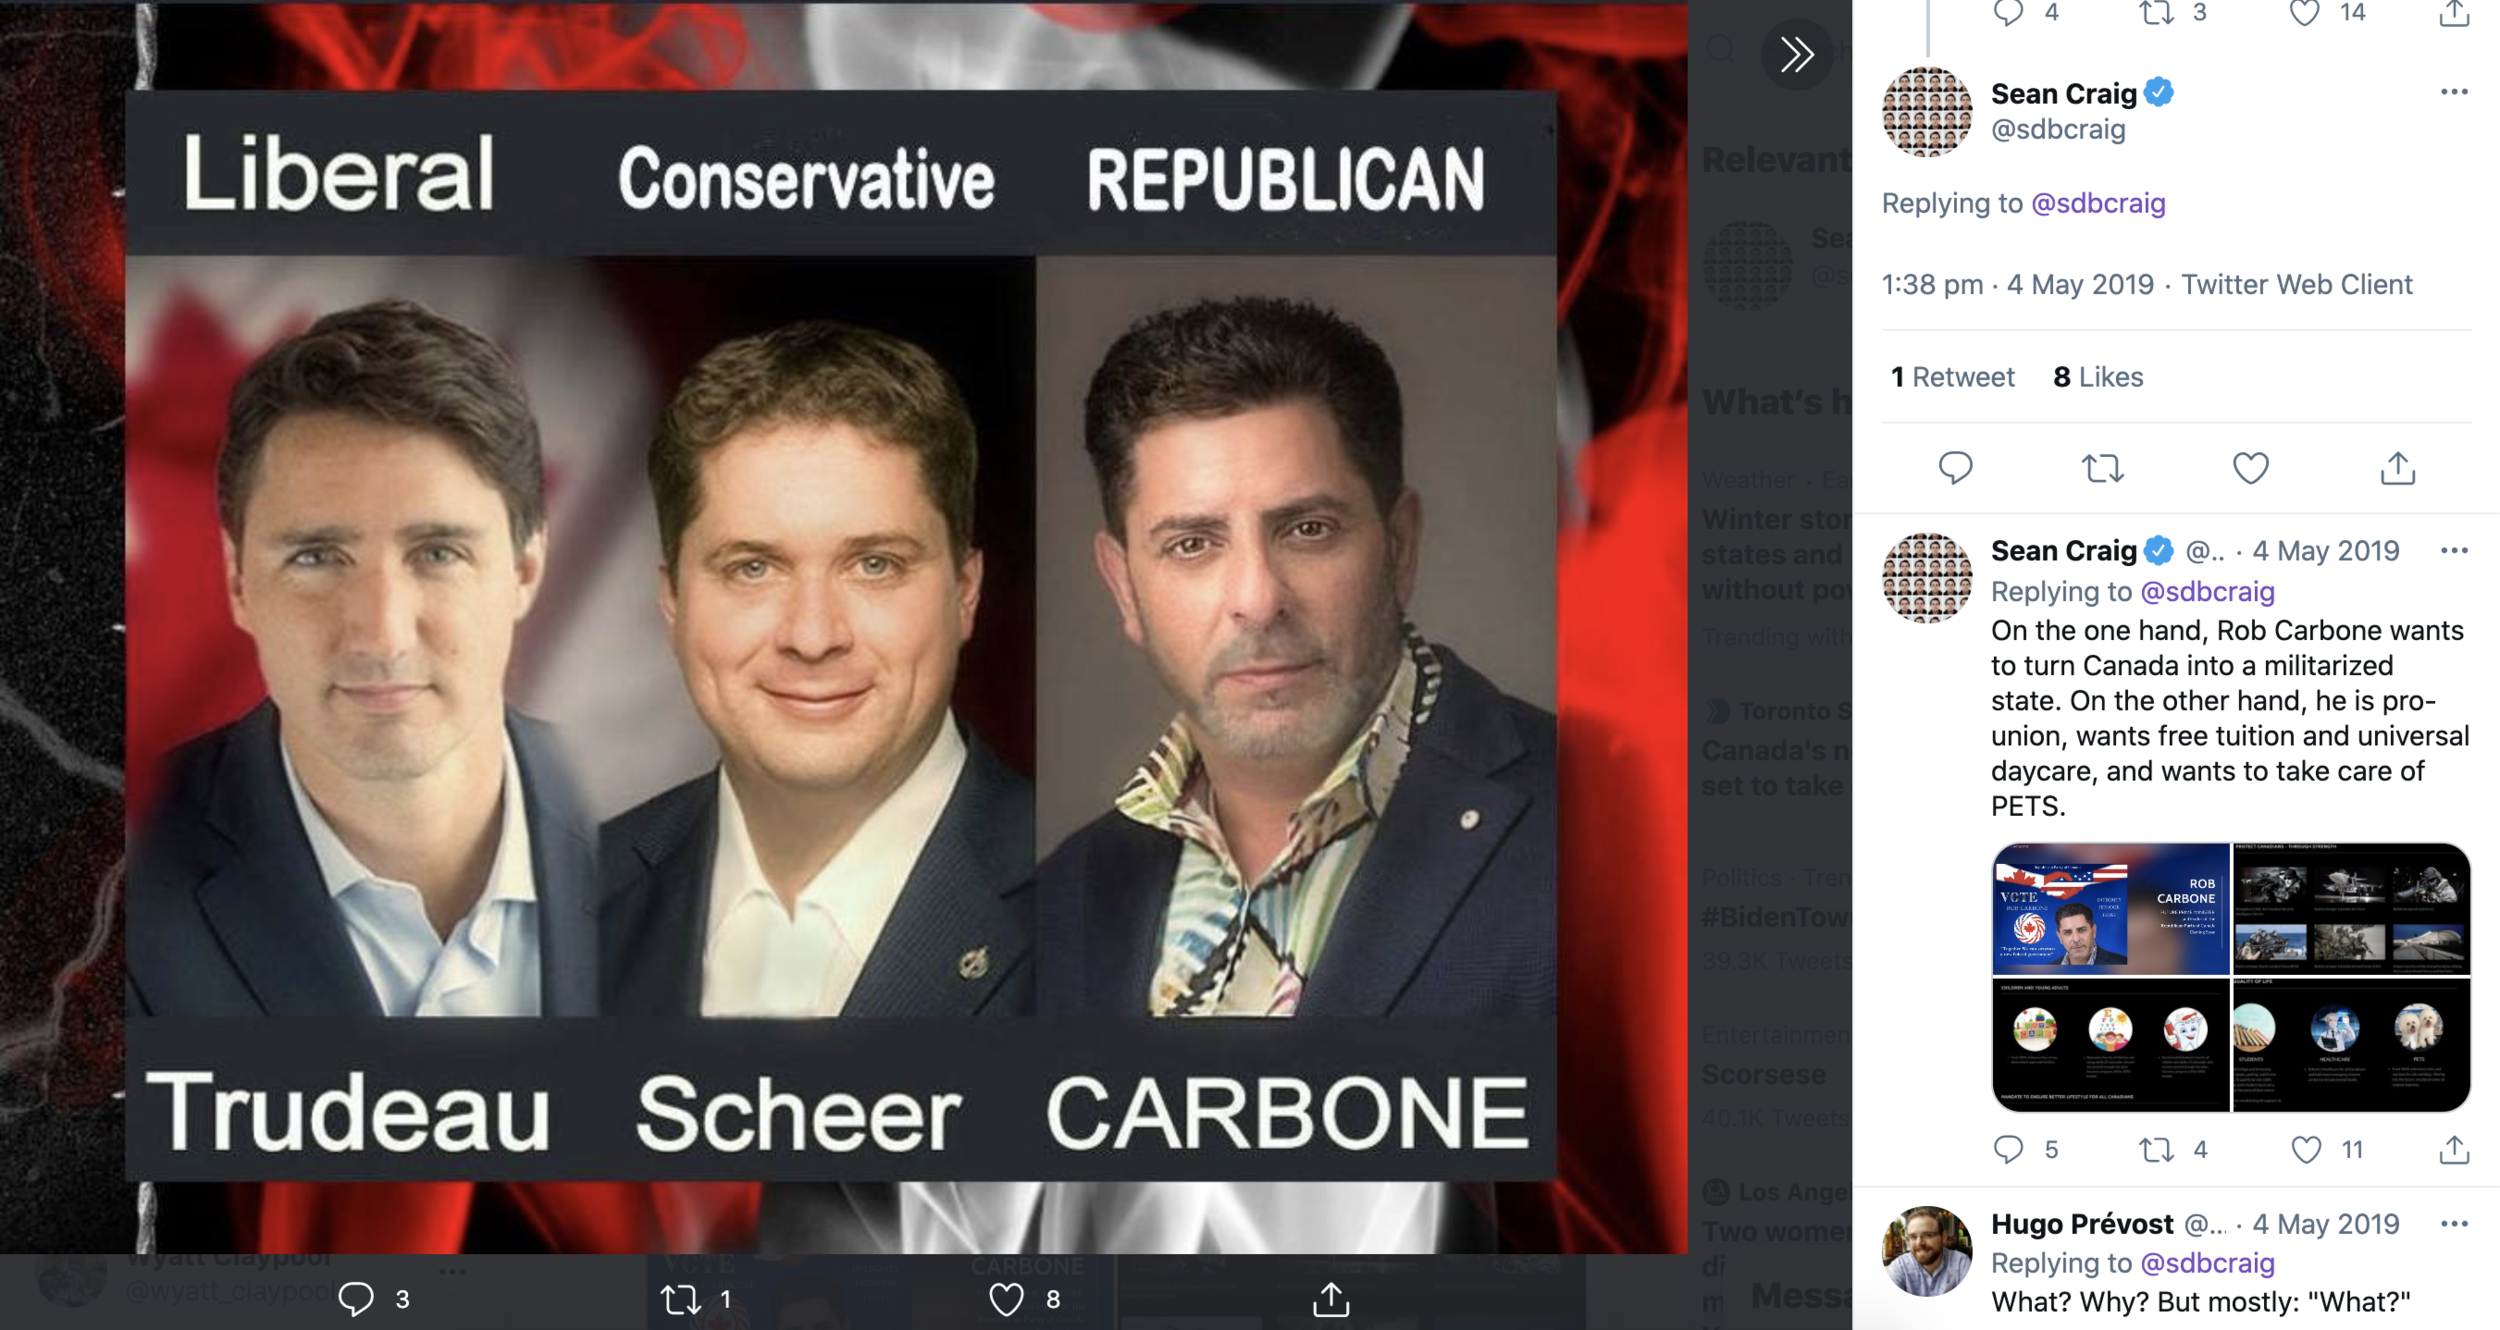 Photo from Sean Craig’s posting of Rob Carbone’s 2019 campaign material on Twitter.